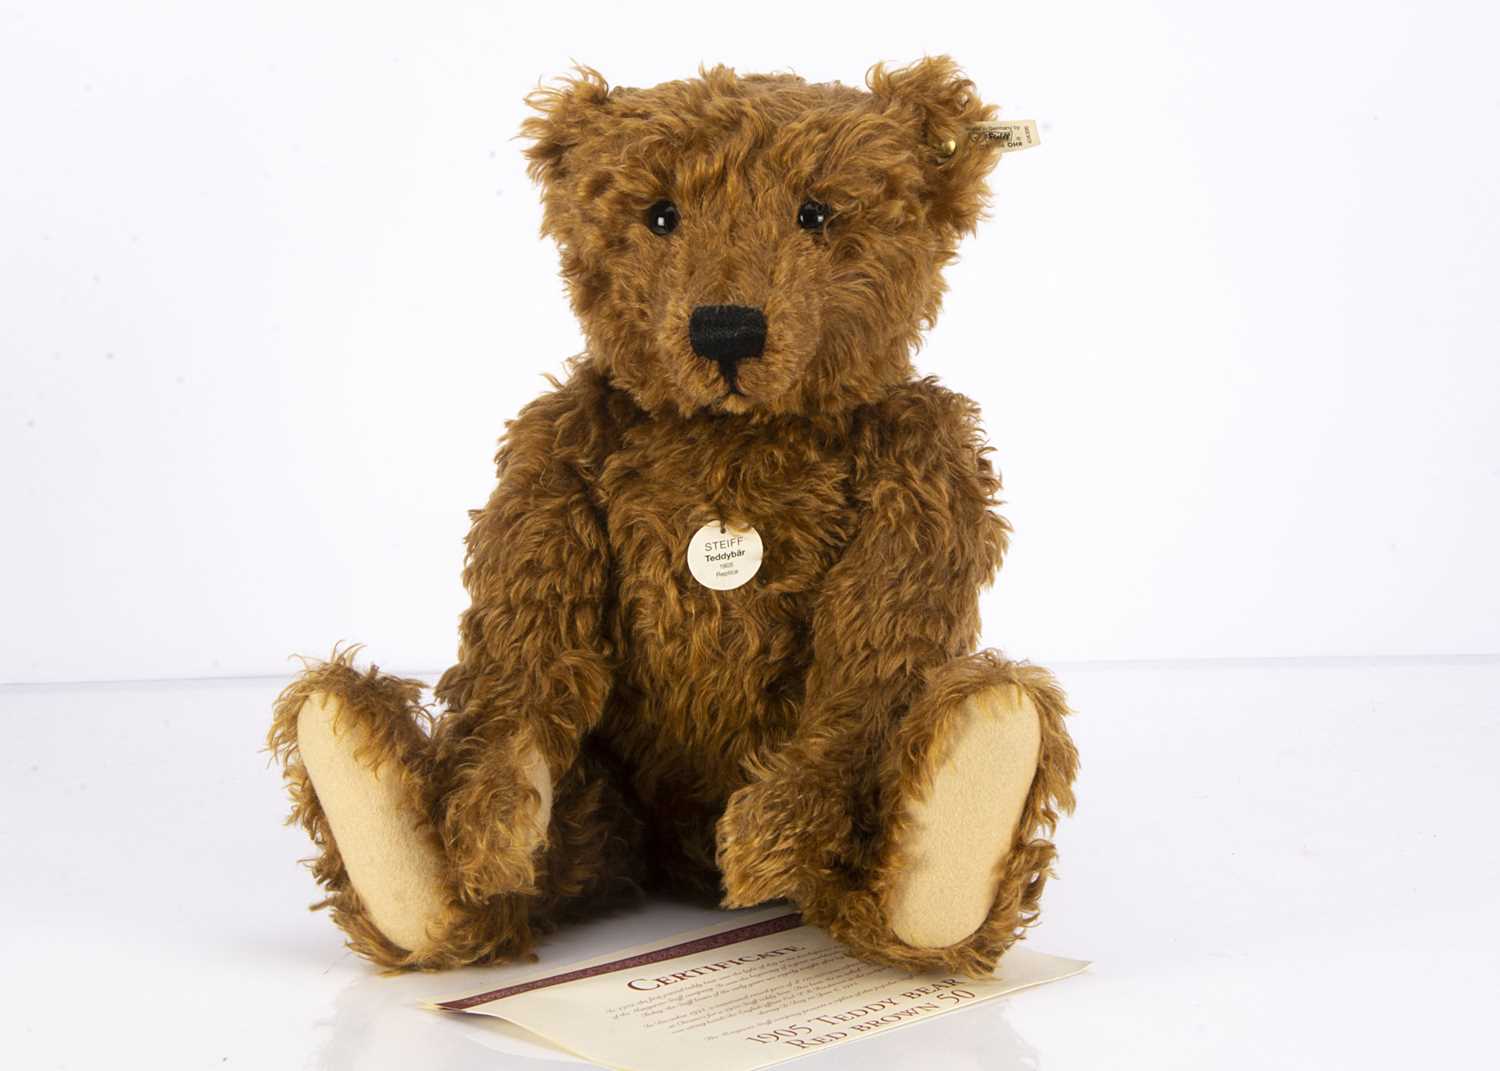 Lot 45 - A Steiff limited edition replica 1905 red brown teddy bear